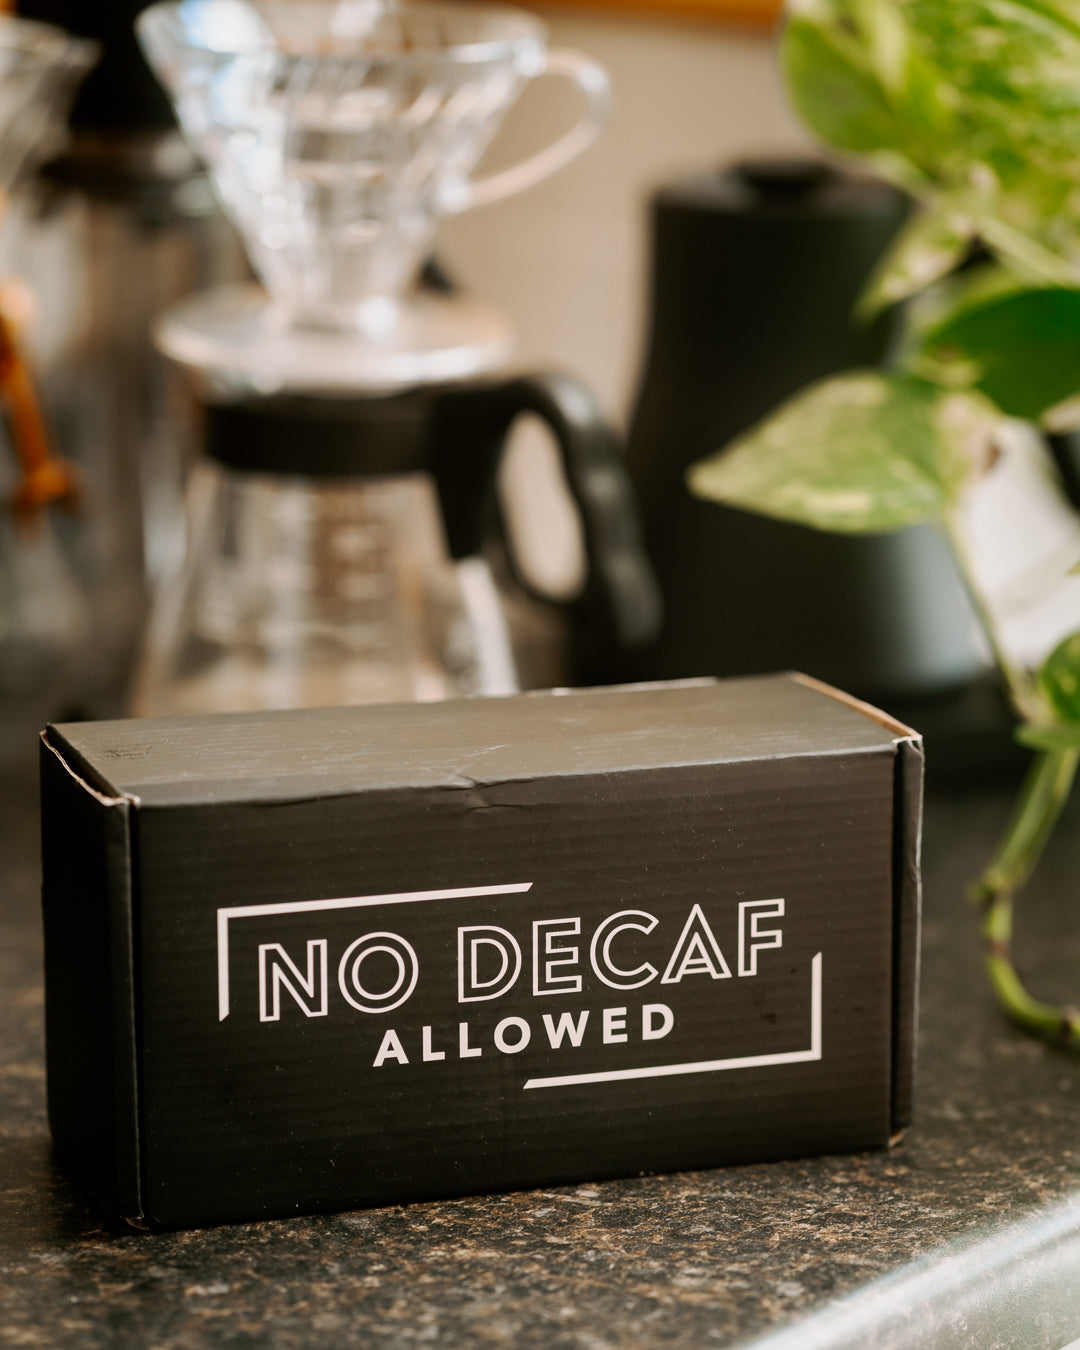 Always gift coffee when in doubt! NO DECAF ALLOWED allows you to personalize every coffee gift!